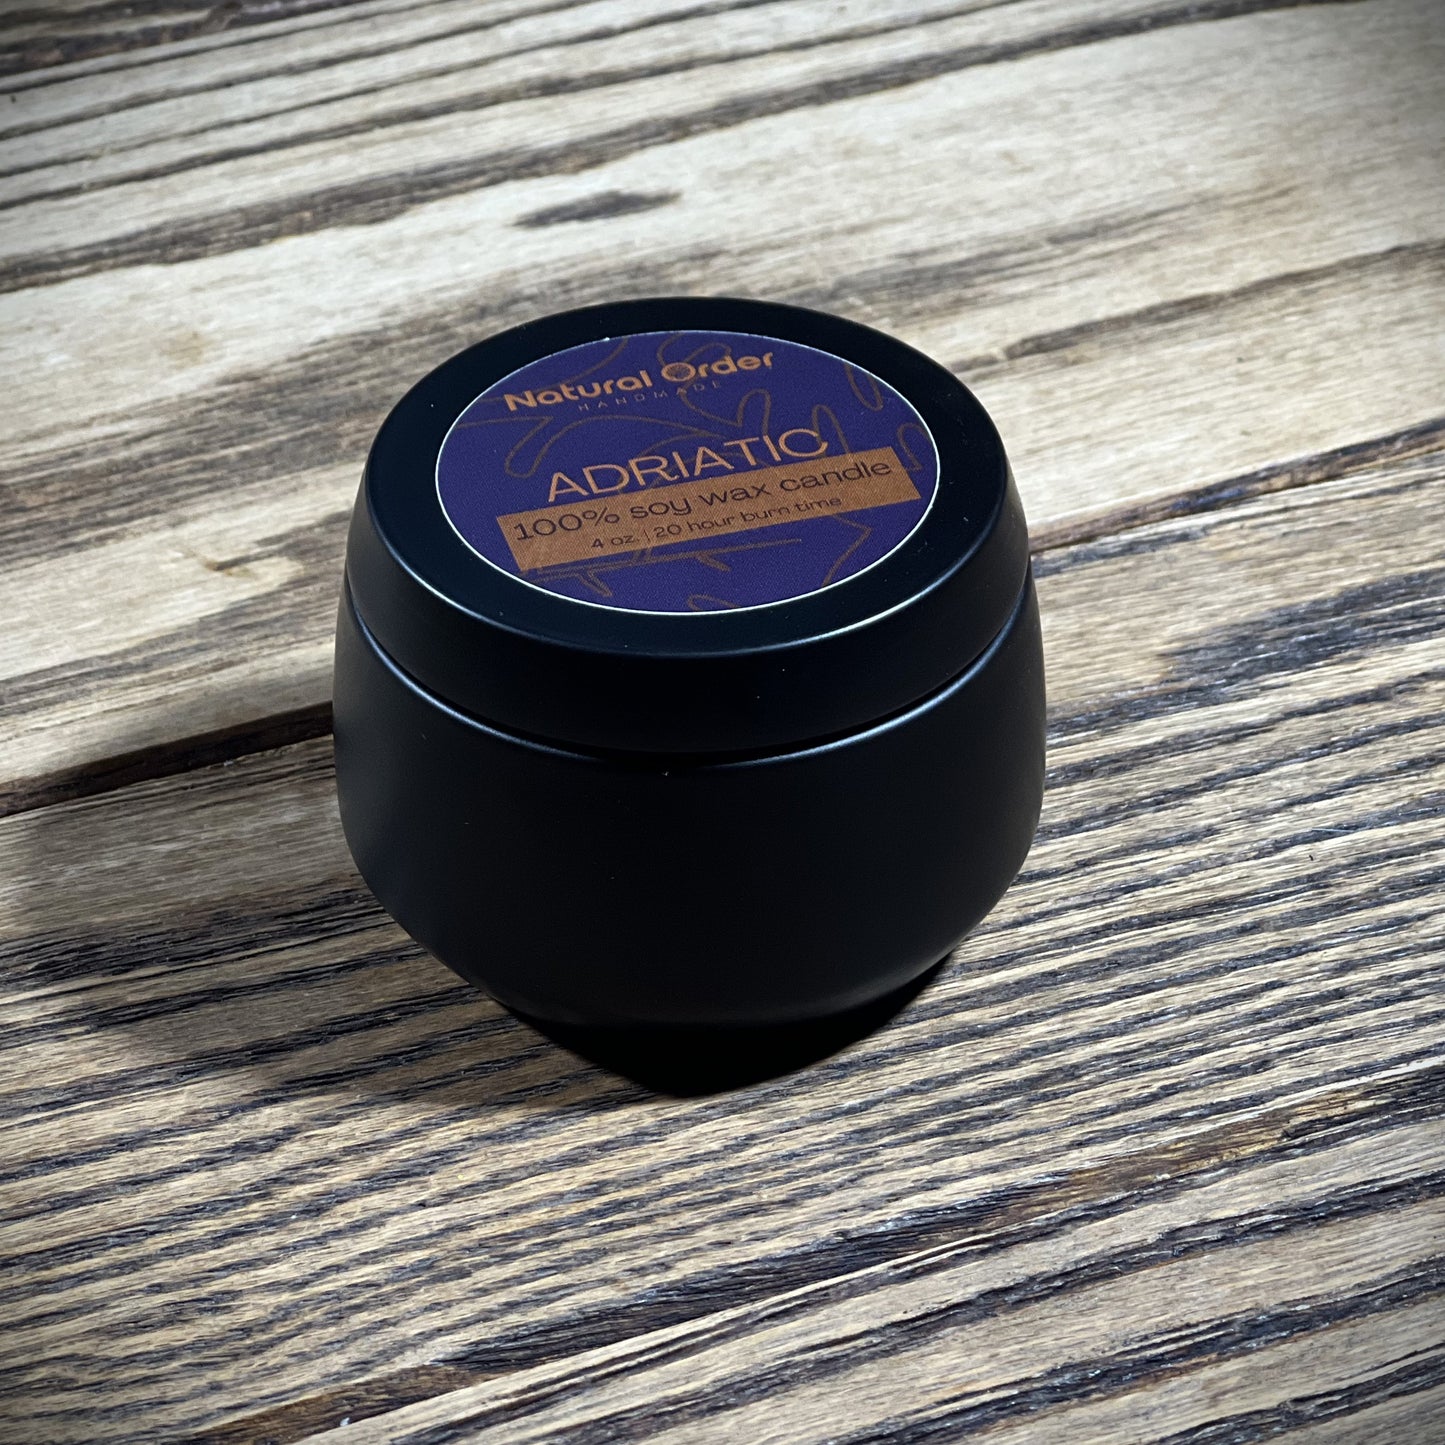 Adriatic Soy Candle 4 ounce